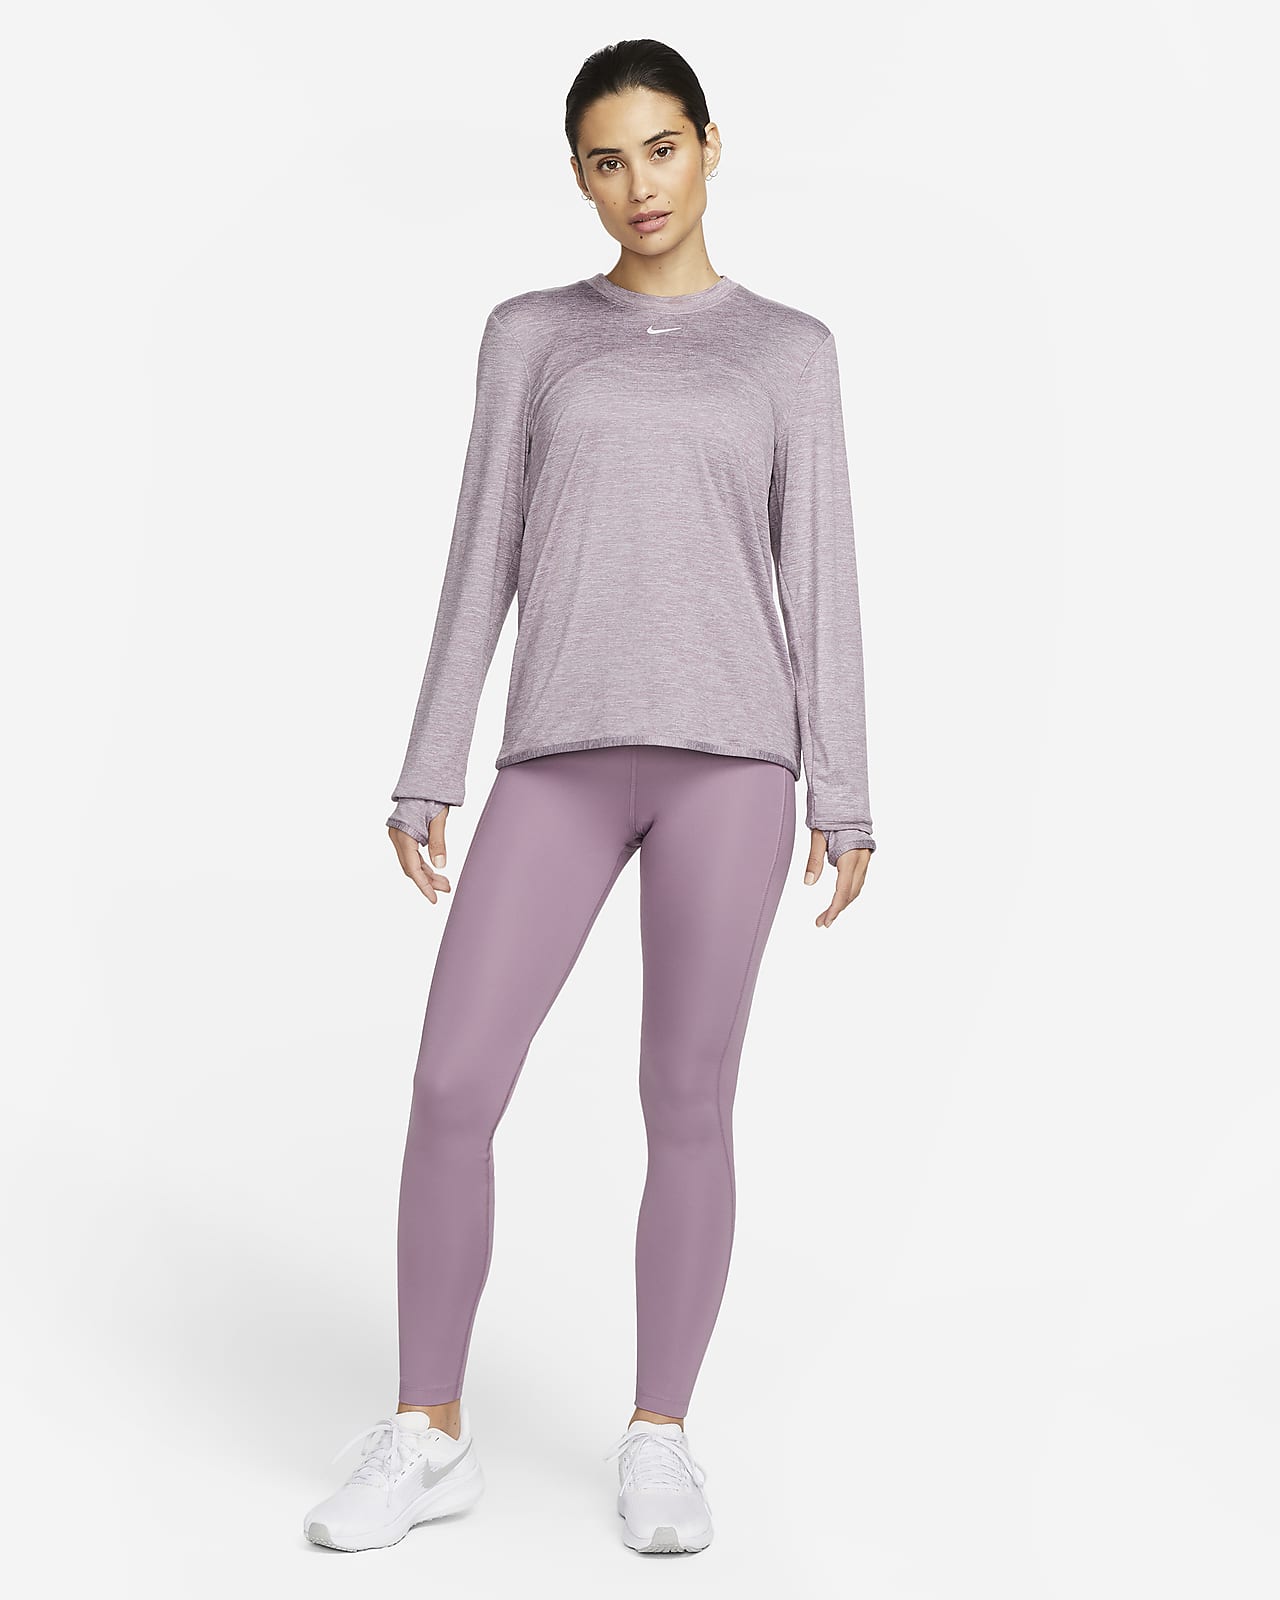 Gray Work Pants + Perfect Layering Top - Lady in VioletLady in Violet